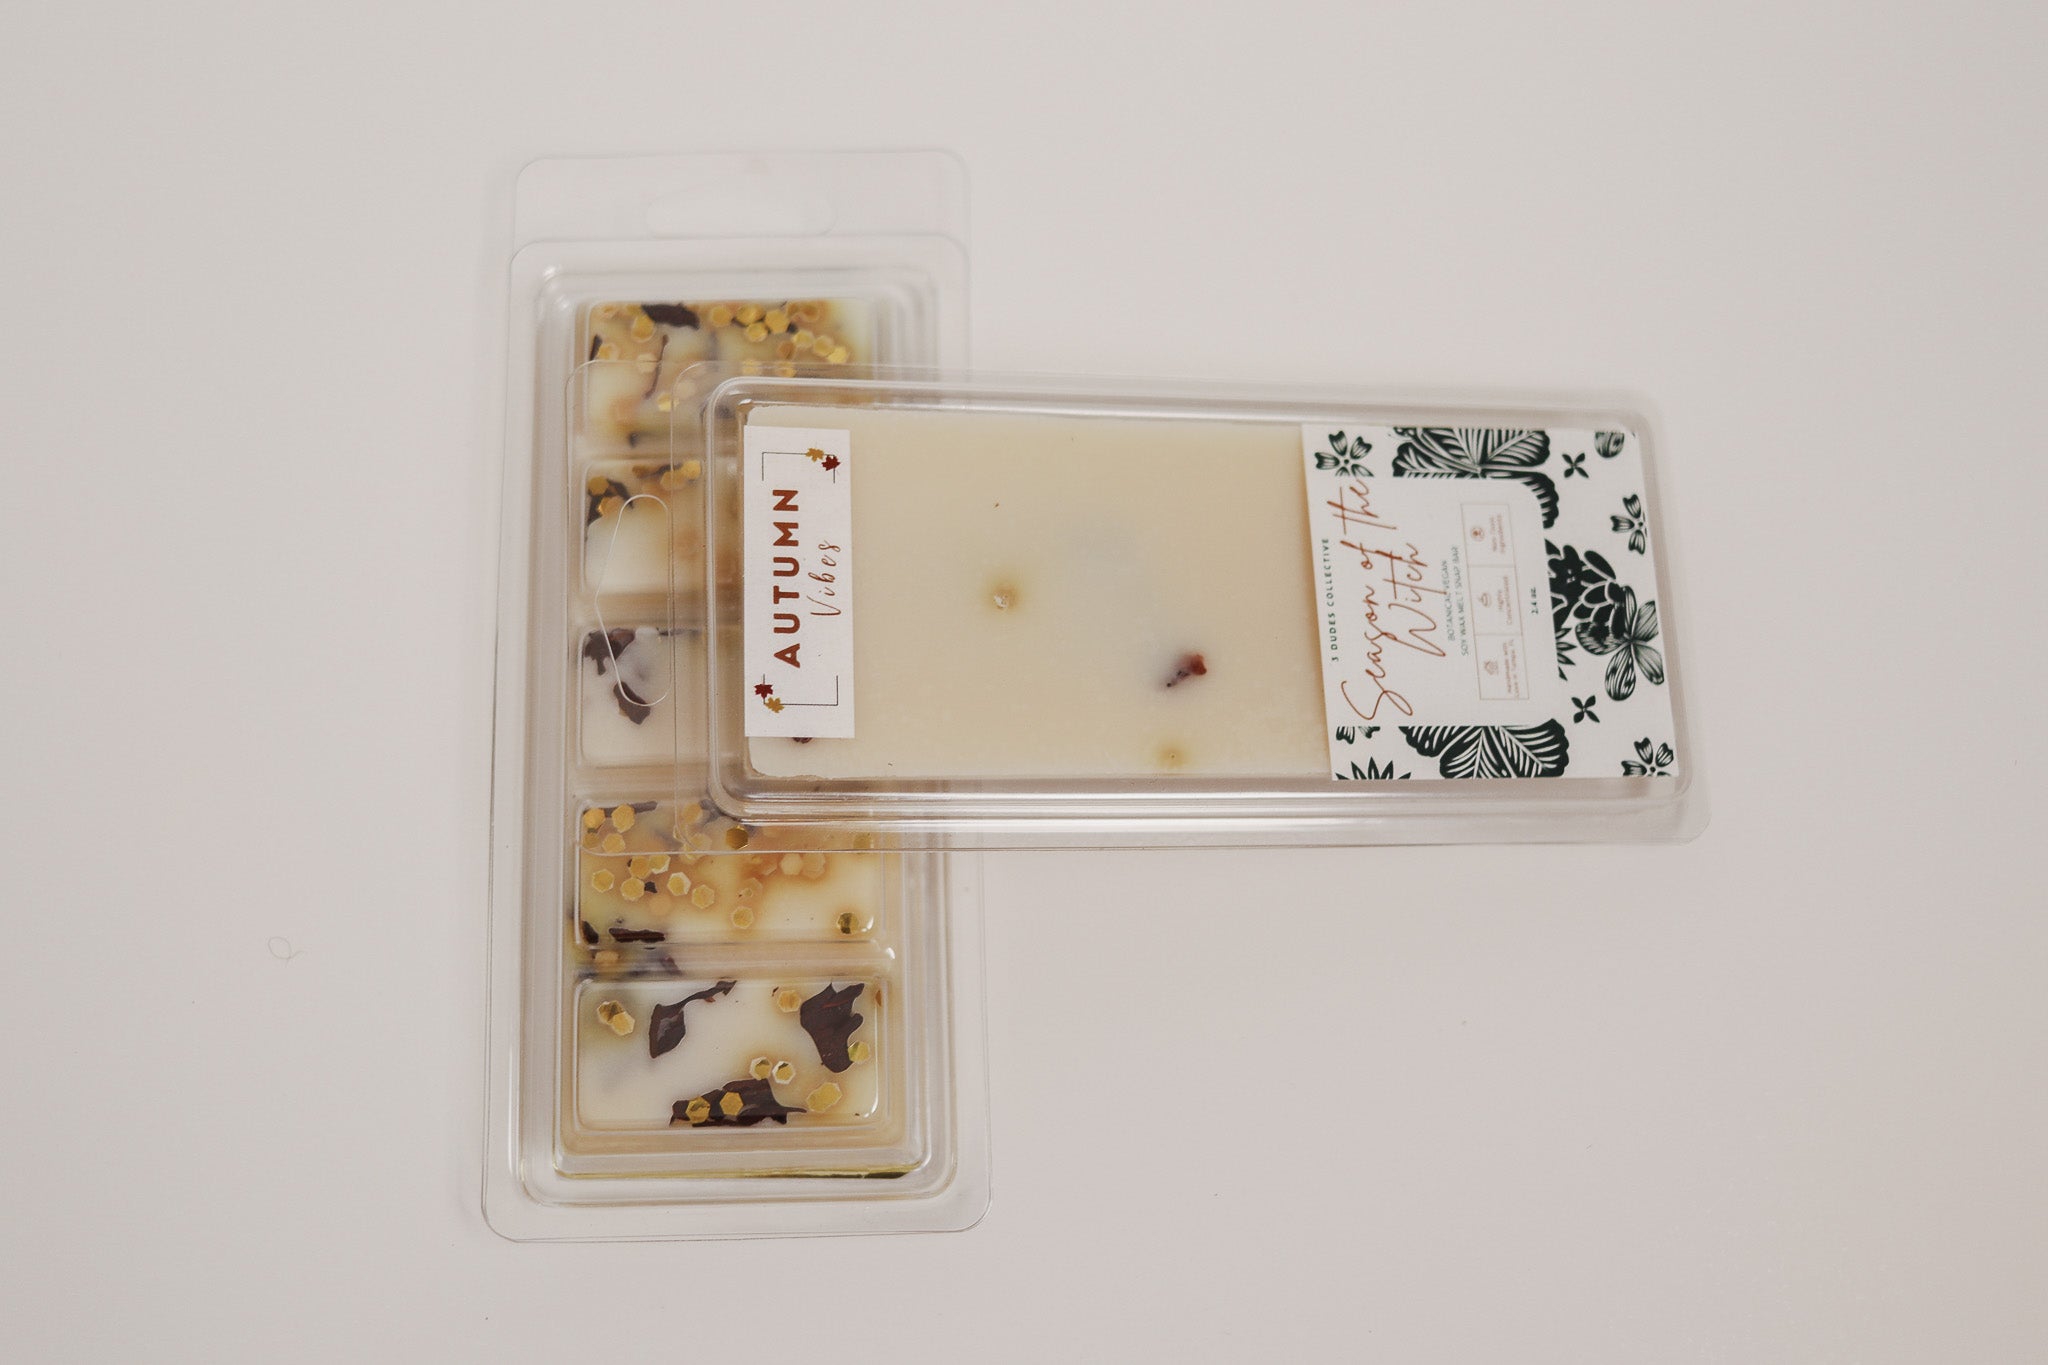 Season of the Witch Soy Wax Snap Bar